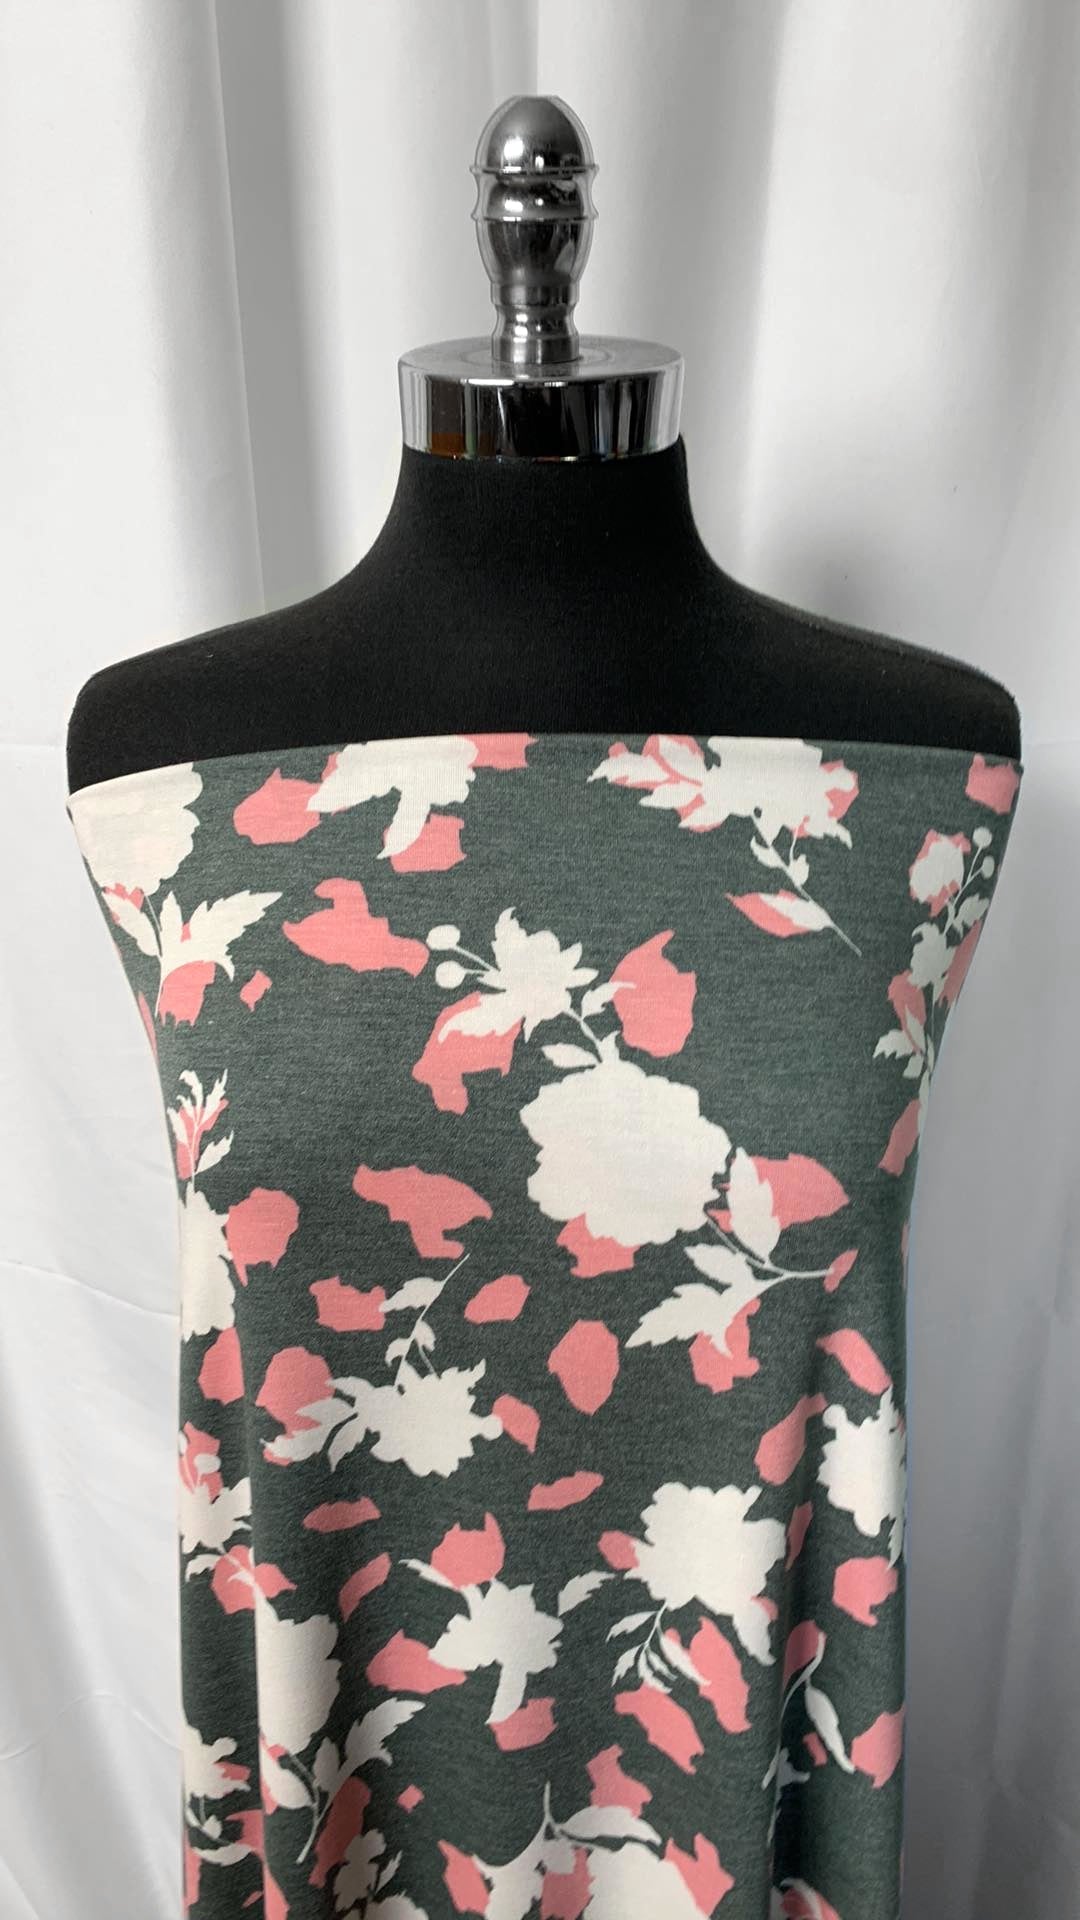 Floral Silhouette - PRS Jersey - 2 Yard Cut